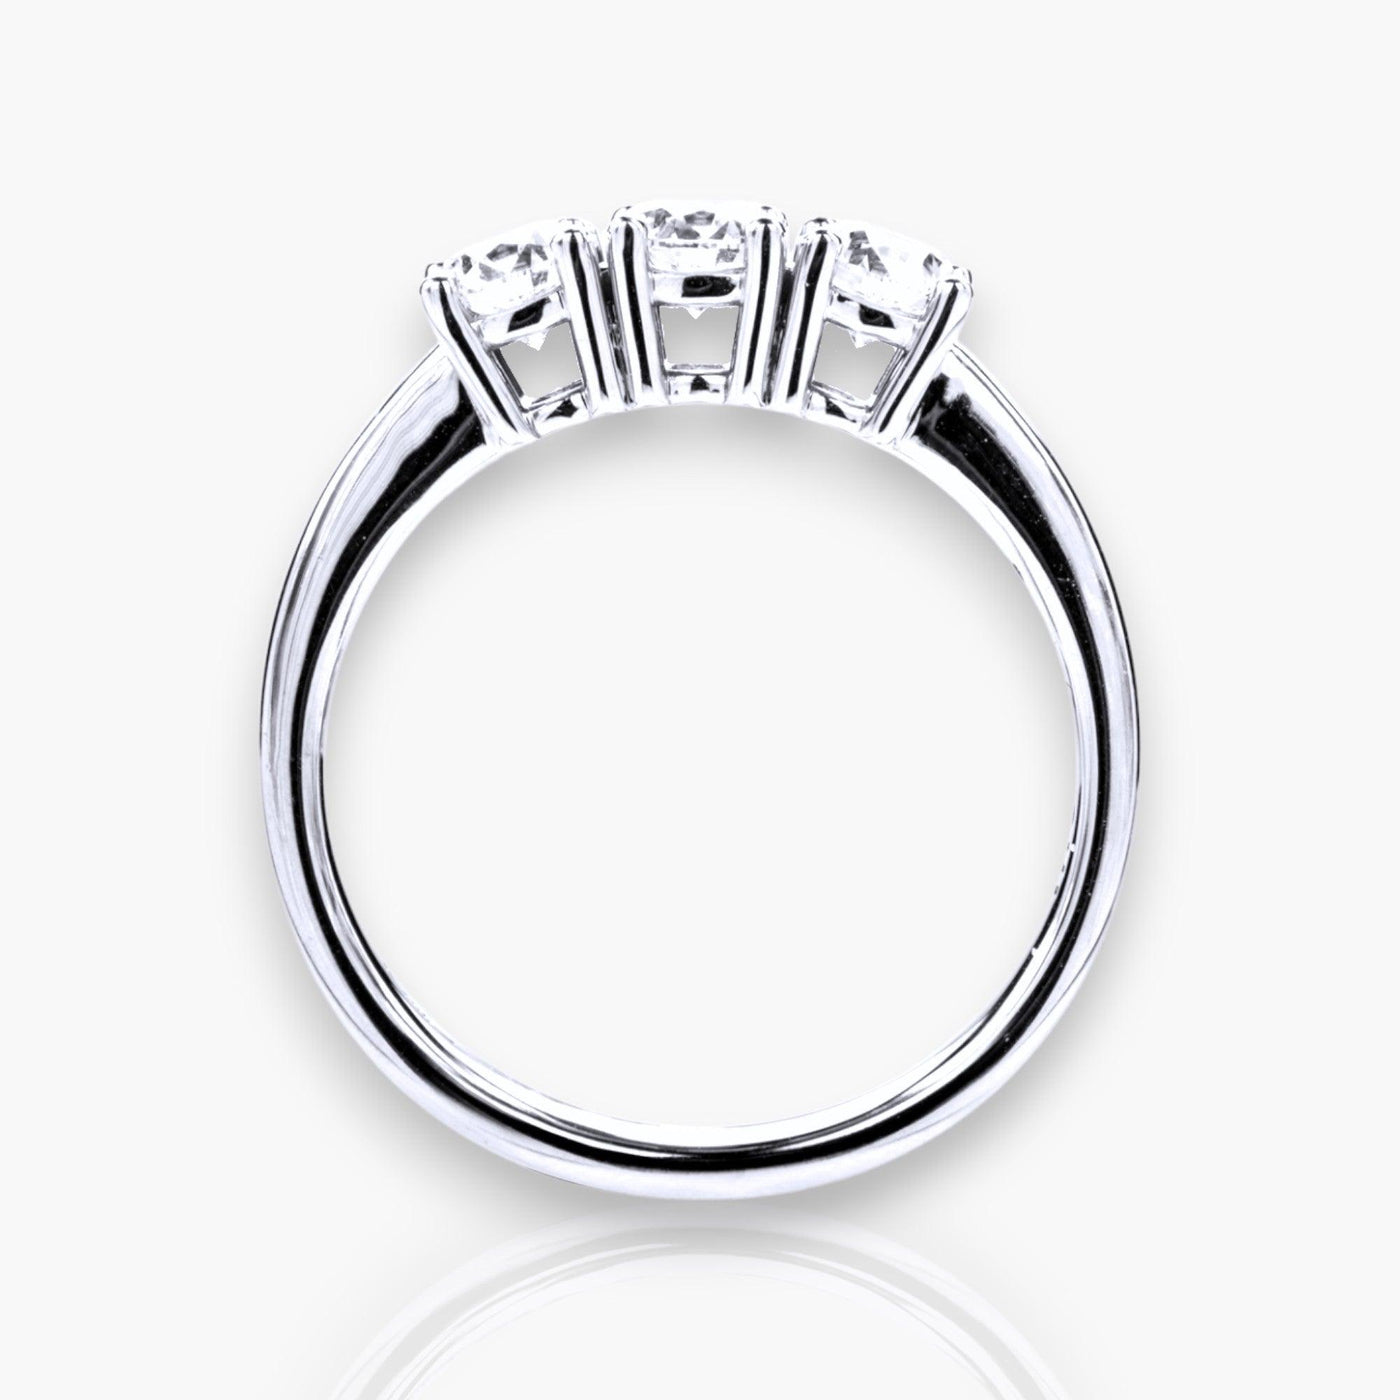 TRILOGY 6 - Riviera Engagement Ring - Moregola Fine Jewelry